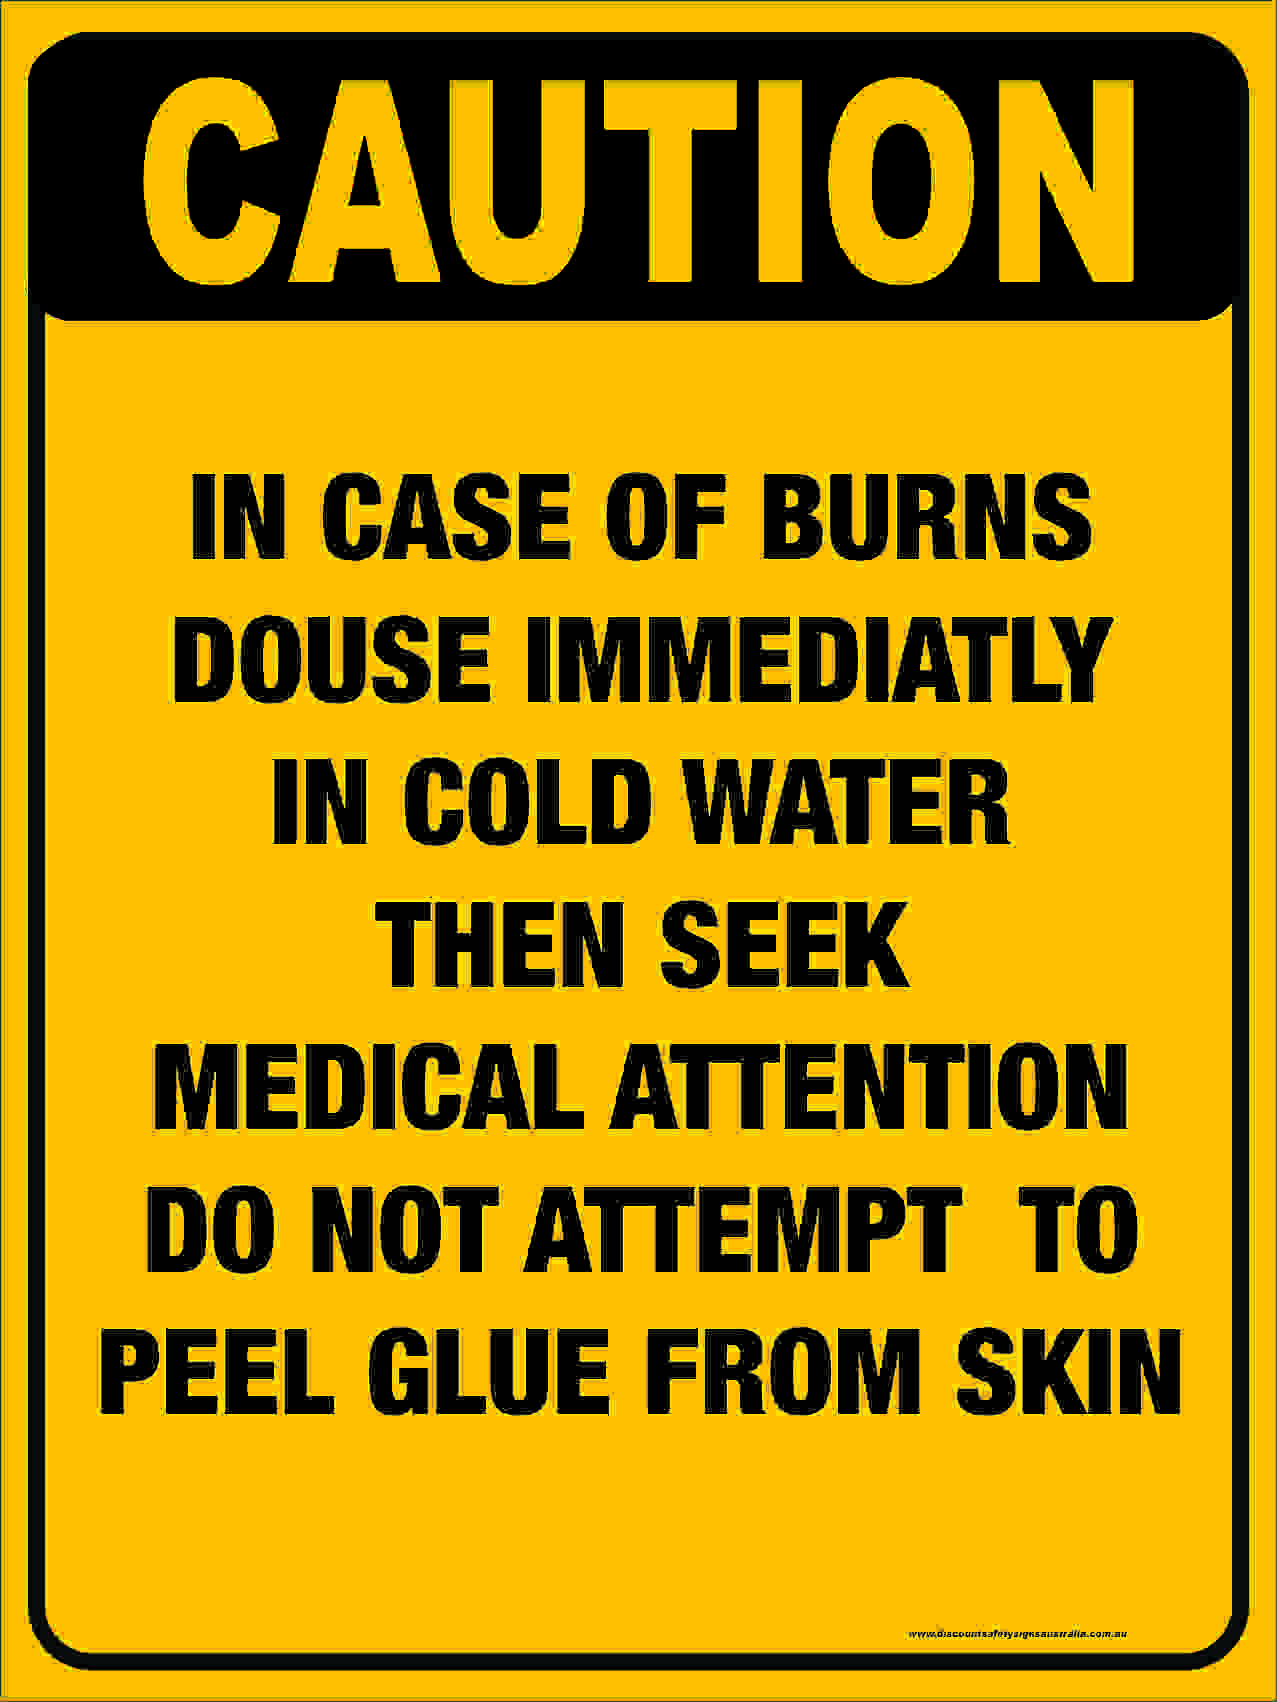 Warning Signs INCASE OF BURNS DOUSE IMMEDIATELY IN WATER